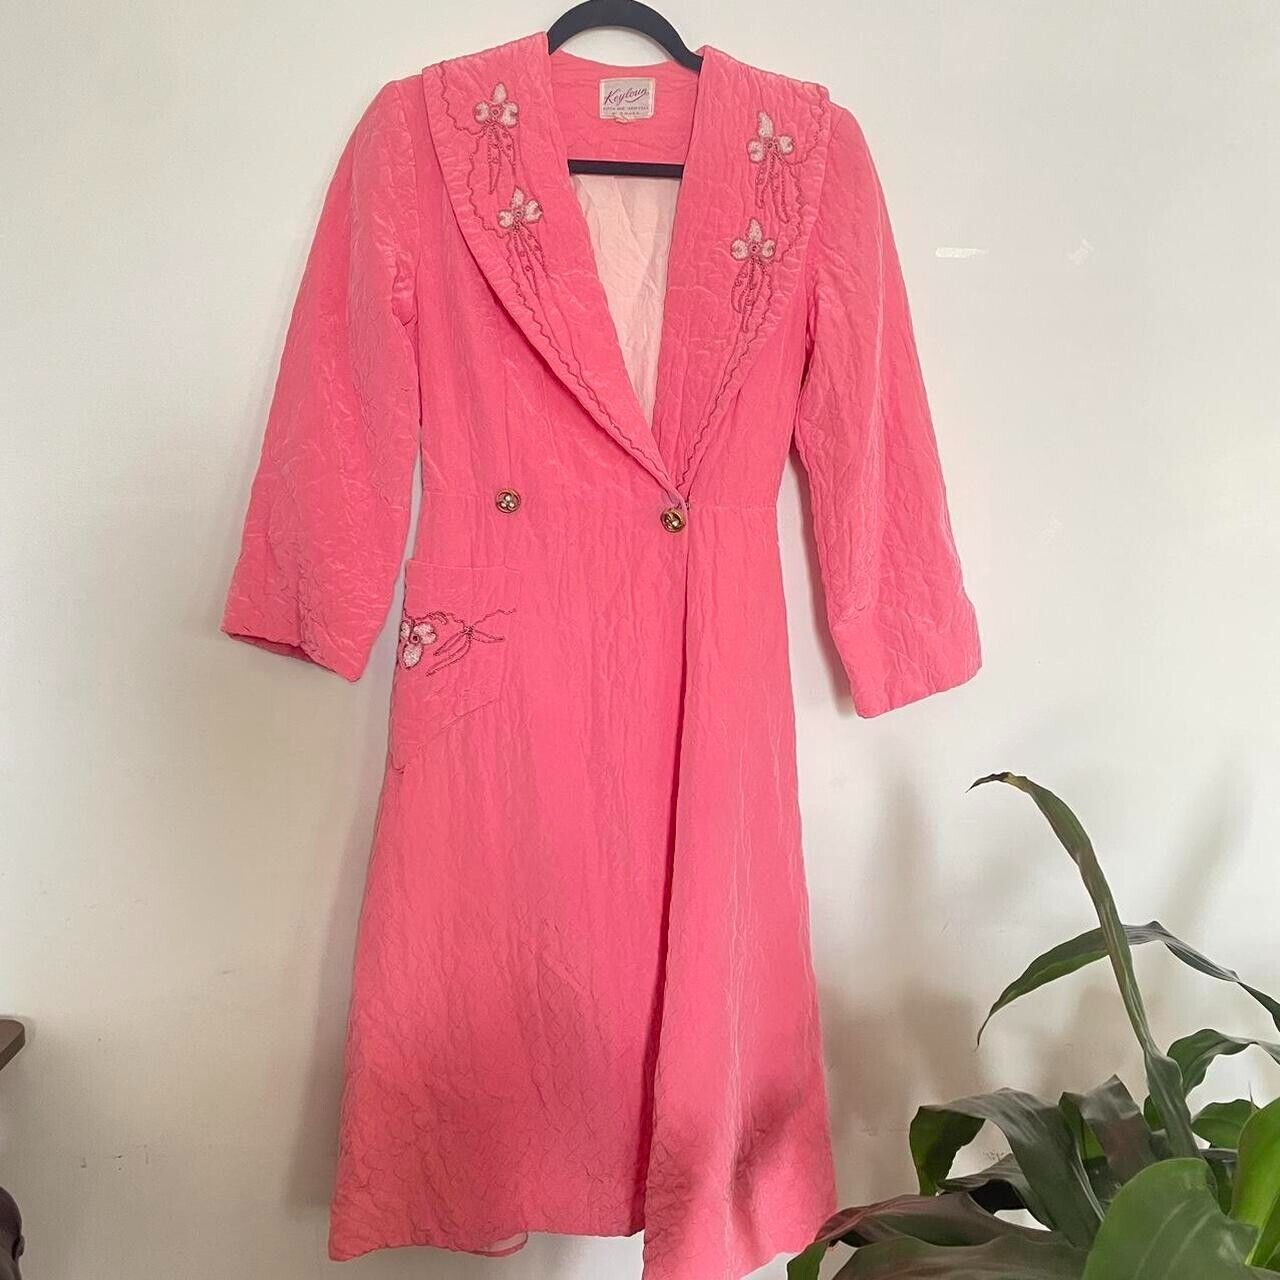 1960s pink quilted housecoat / robe, embroidered